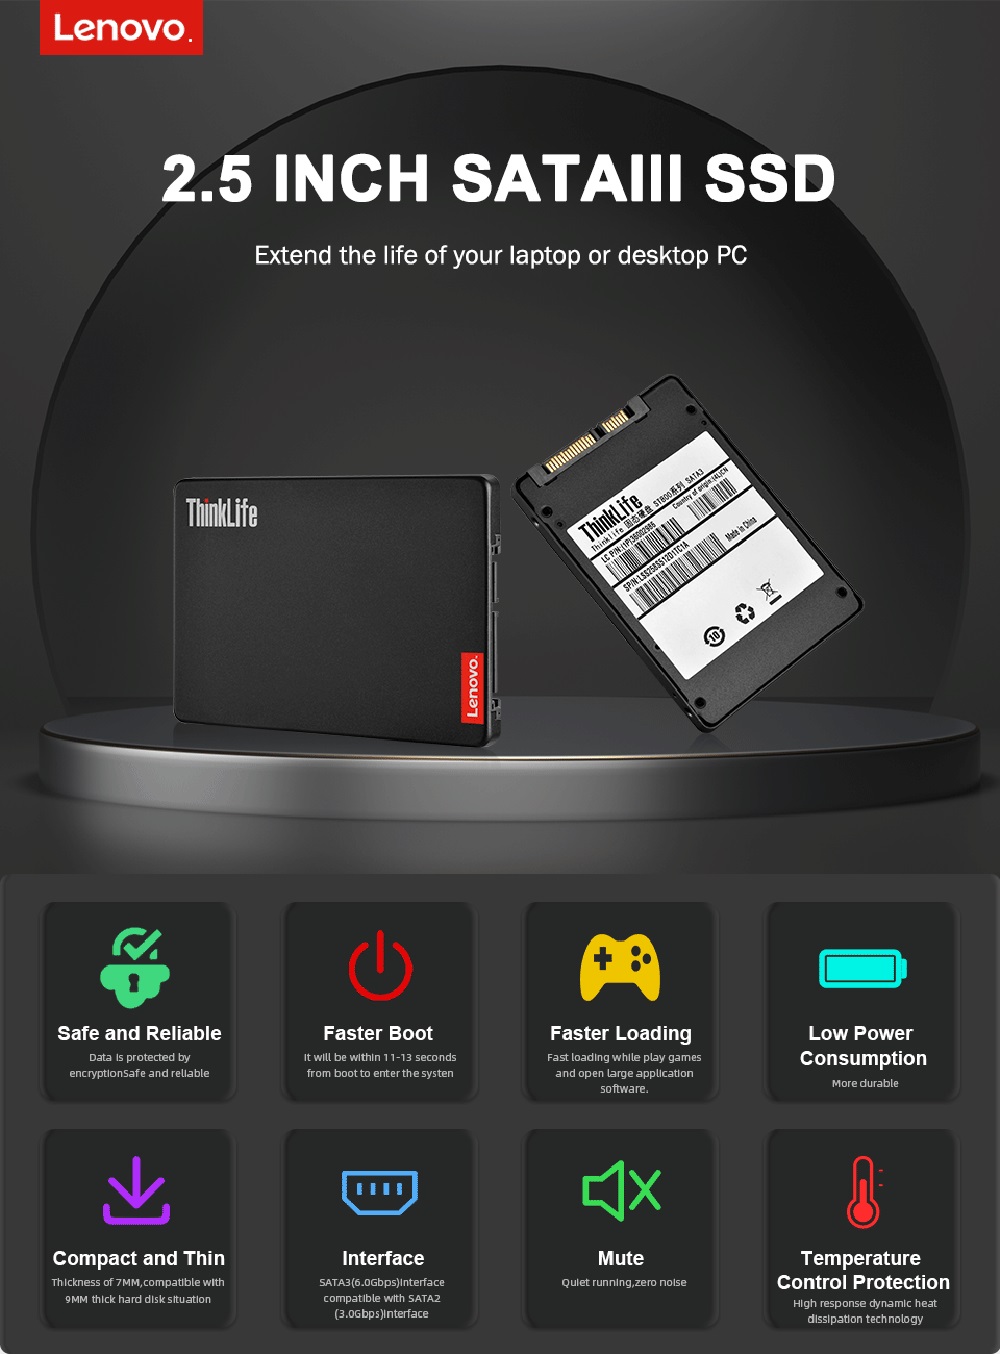 Lenovo ThinkLife ST600 2.5 inch SATA3 Solid State Drive 120GB 240GB 480GB TLC NAND Flash SSD Hard Disk for Laptop Desktop Computer